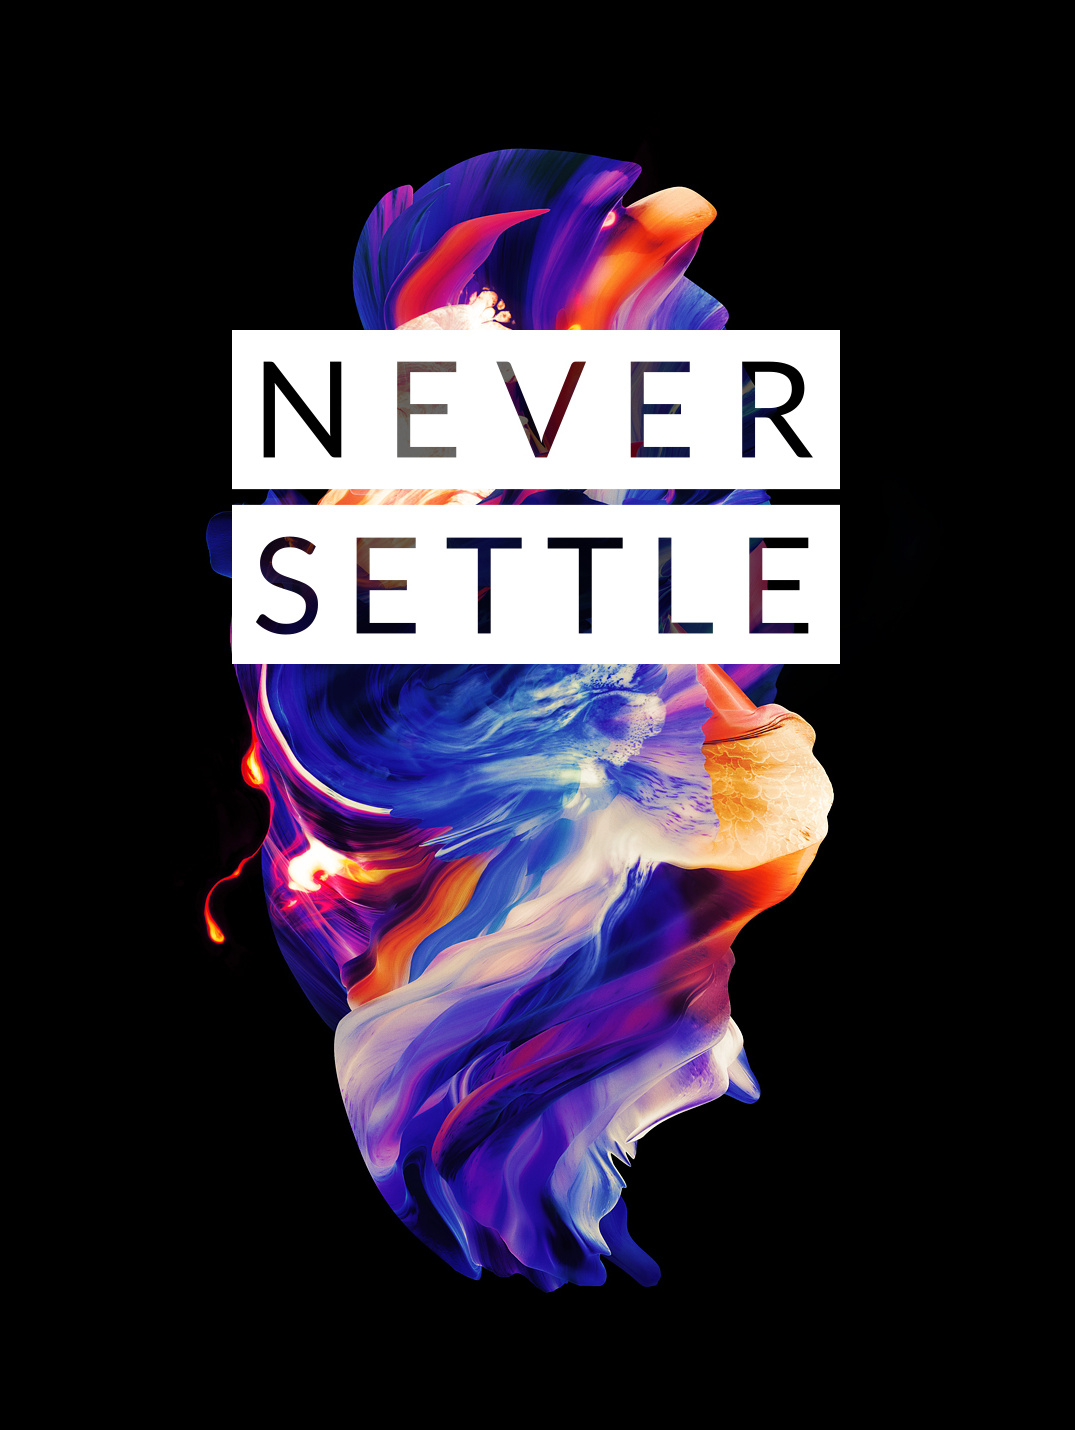 Official Wallpapers In 2k Or 4k Formats - Oneplus 6t Never Settle Wallpaper 4k , HD Wallpaper & Backgrounds